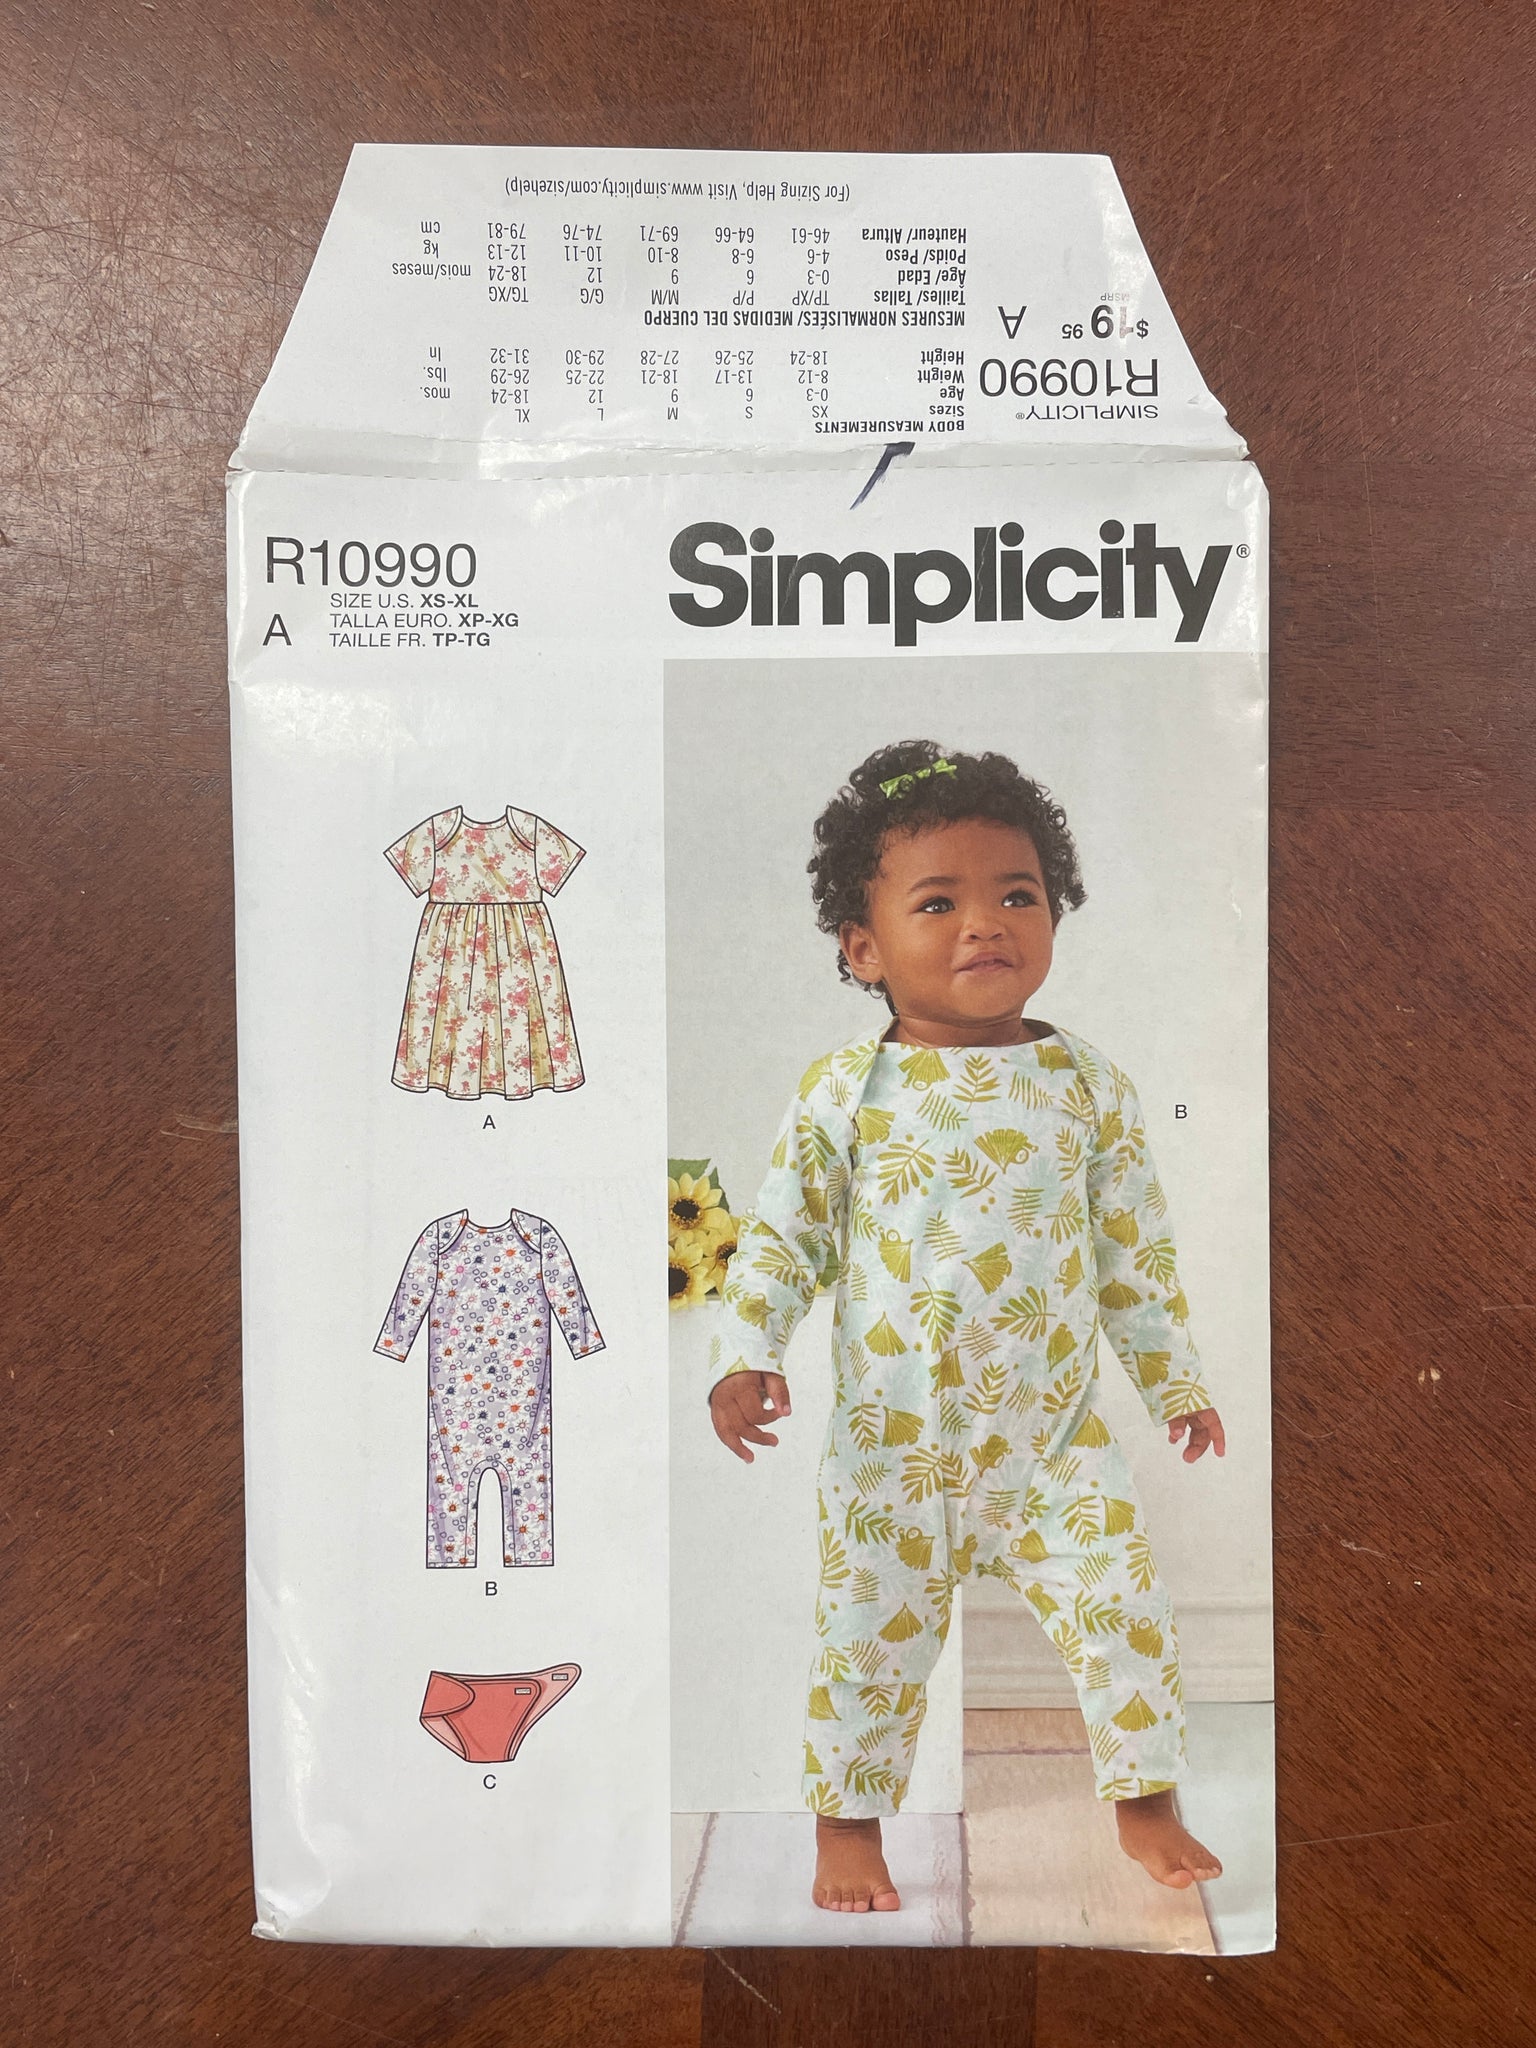 2021 Simplicity 10990 Sewing Pattern - Baby Garments FACTORY FOLDED